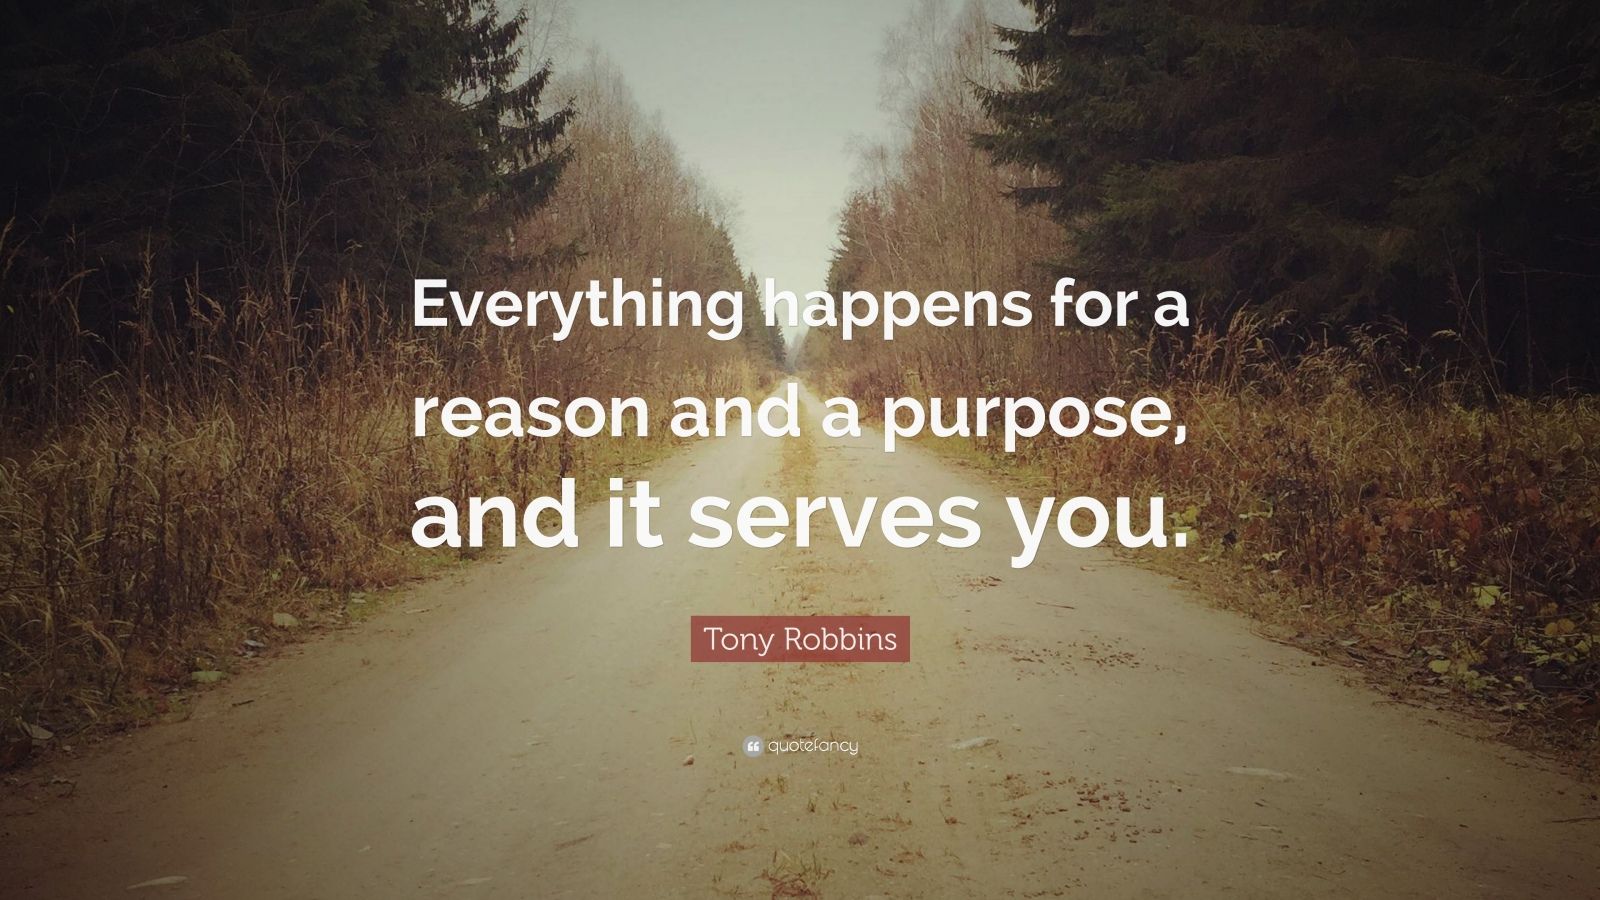 Tony Robbins Quote: “Everything happens for a reason and a purpose, and